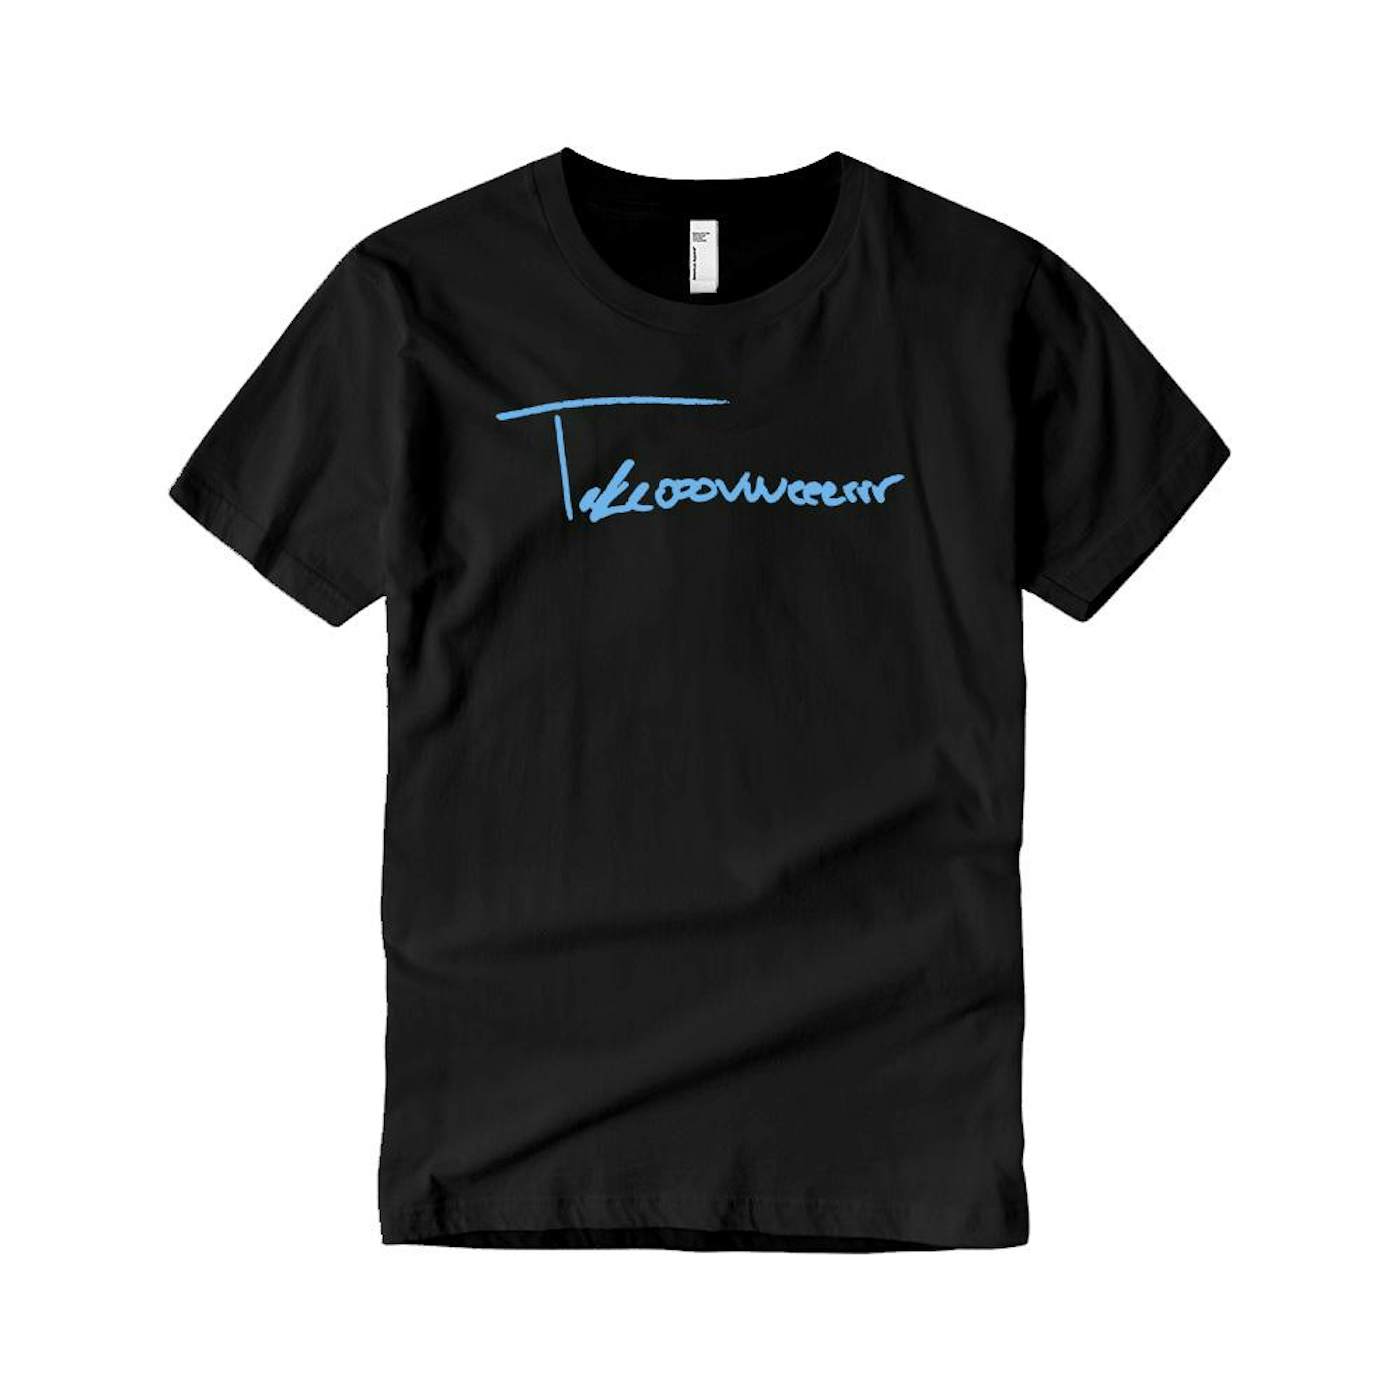 Taylor J Takeover Signature T-Shirt (Black/Baby Blue)